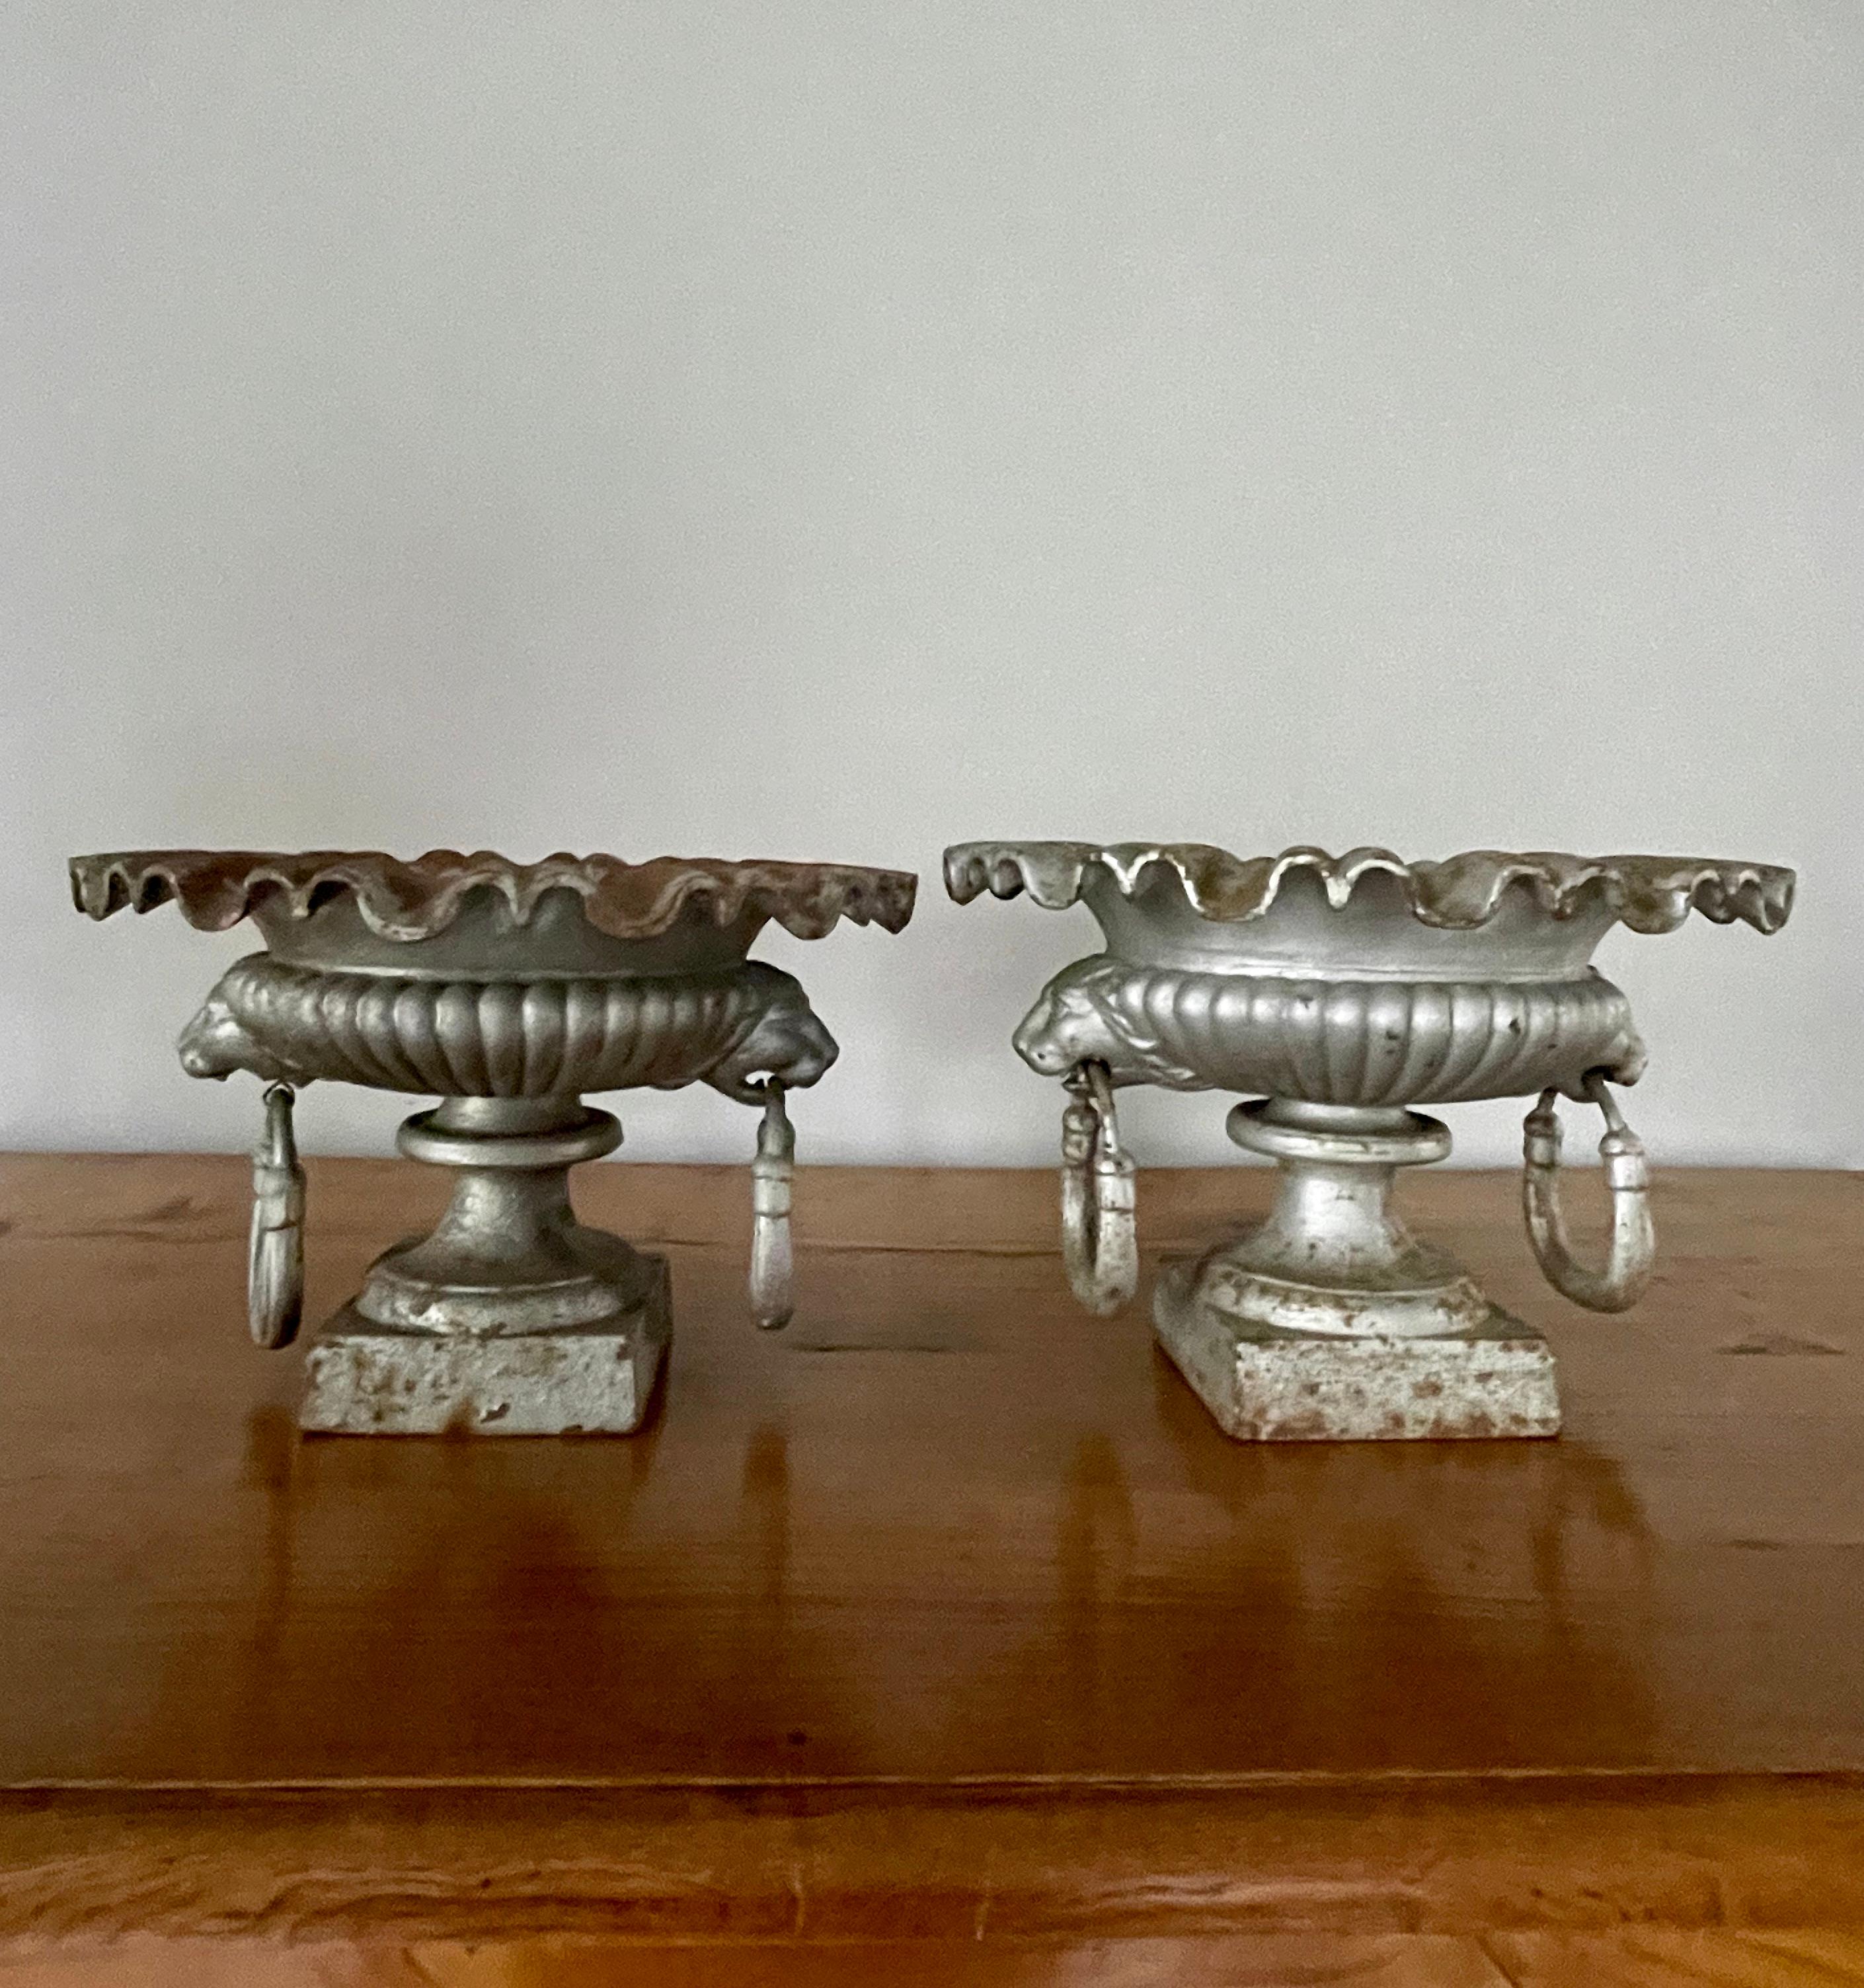 This style of urn is hardly ever found and they are just wonderful! With their heavily-ruffled rims, semi-lobed bodies, and lion-head ring handles, they are perfect for a stunning flower-filled tabletop display inside or out. Dating to the 1880s but